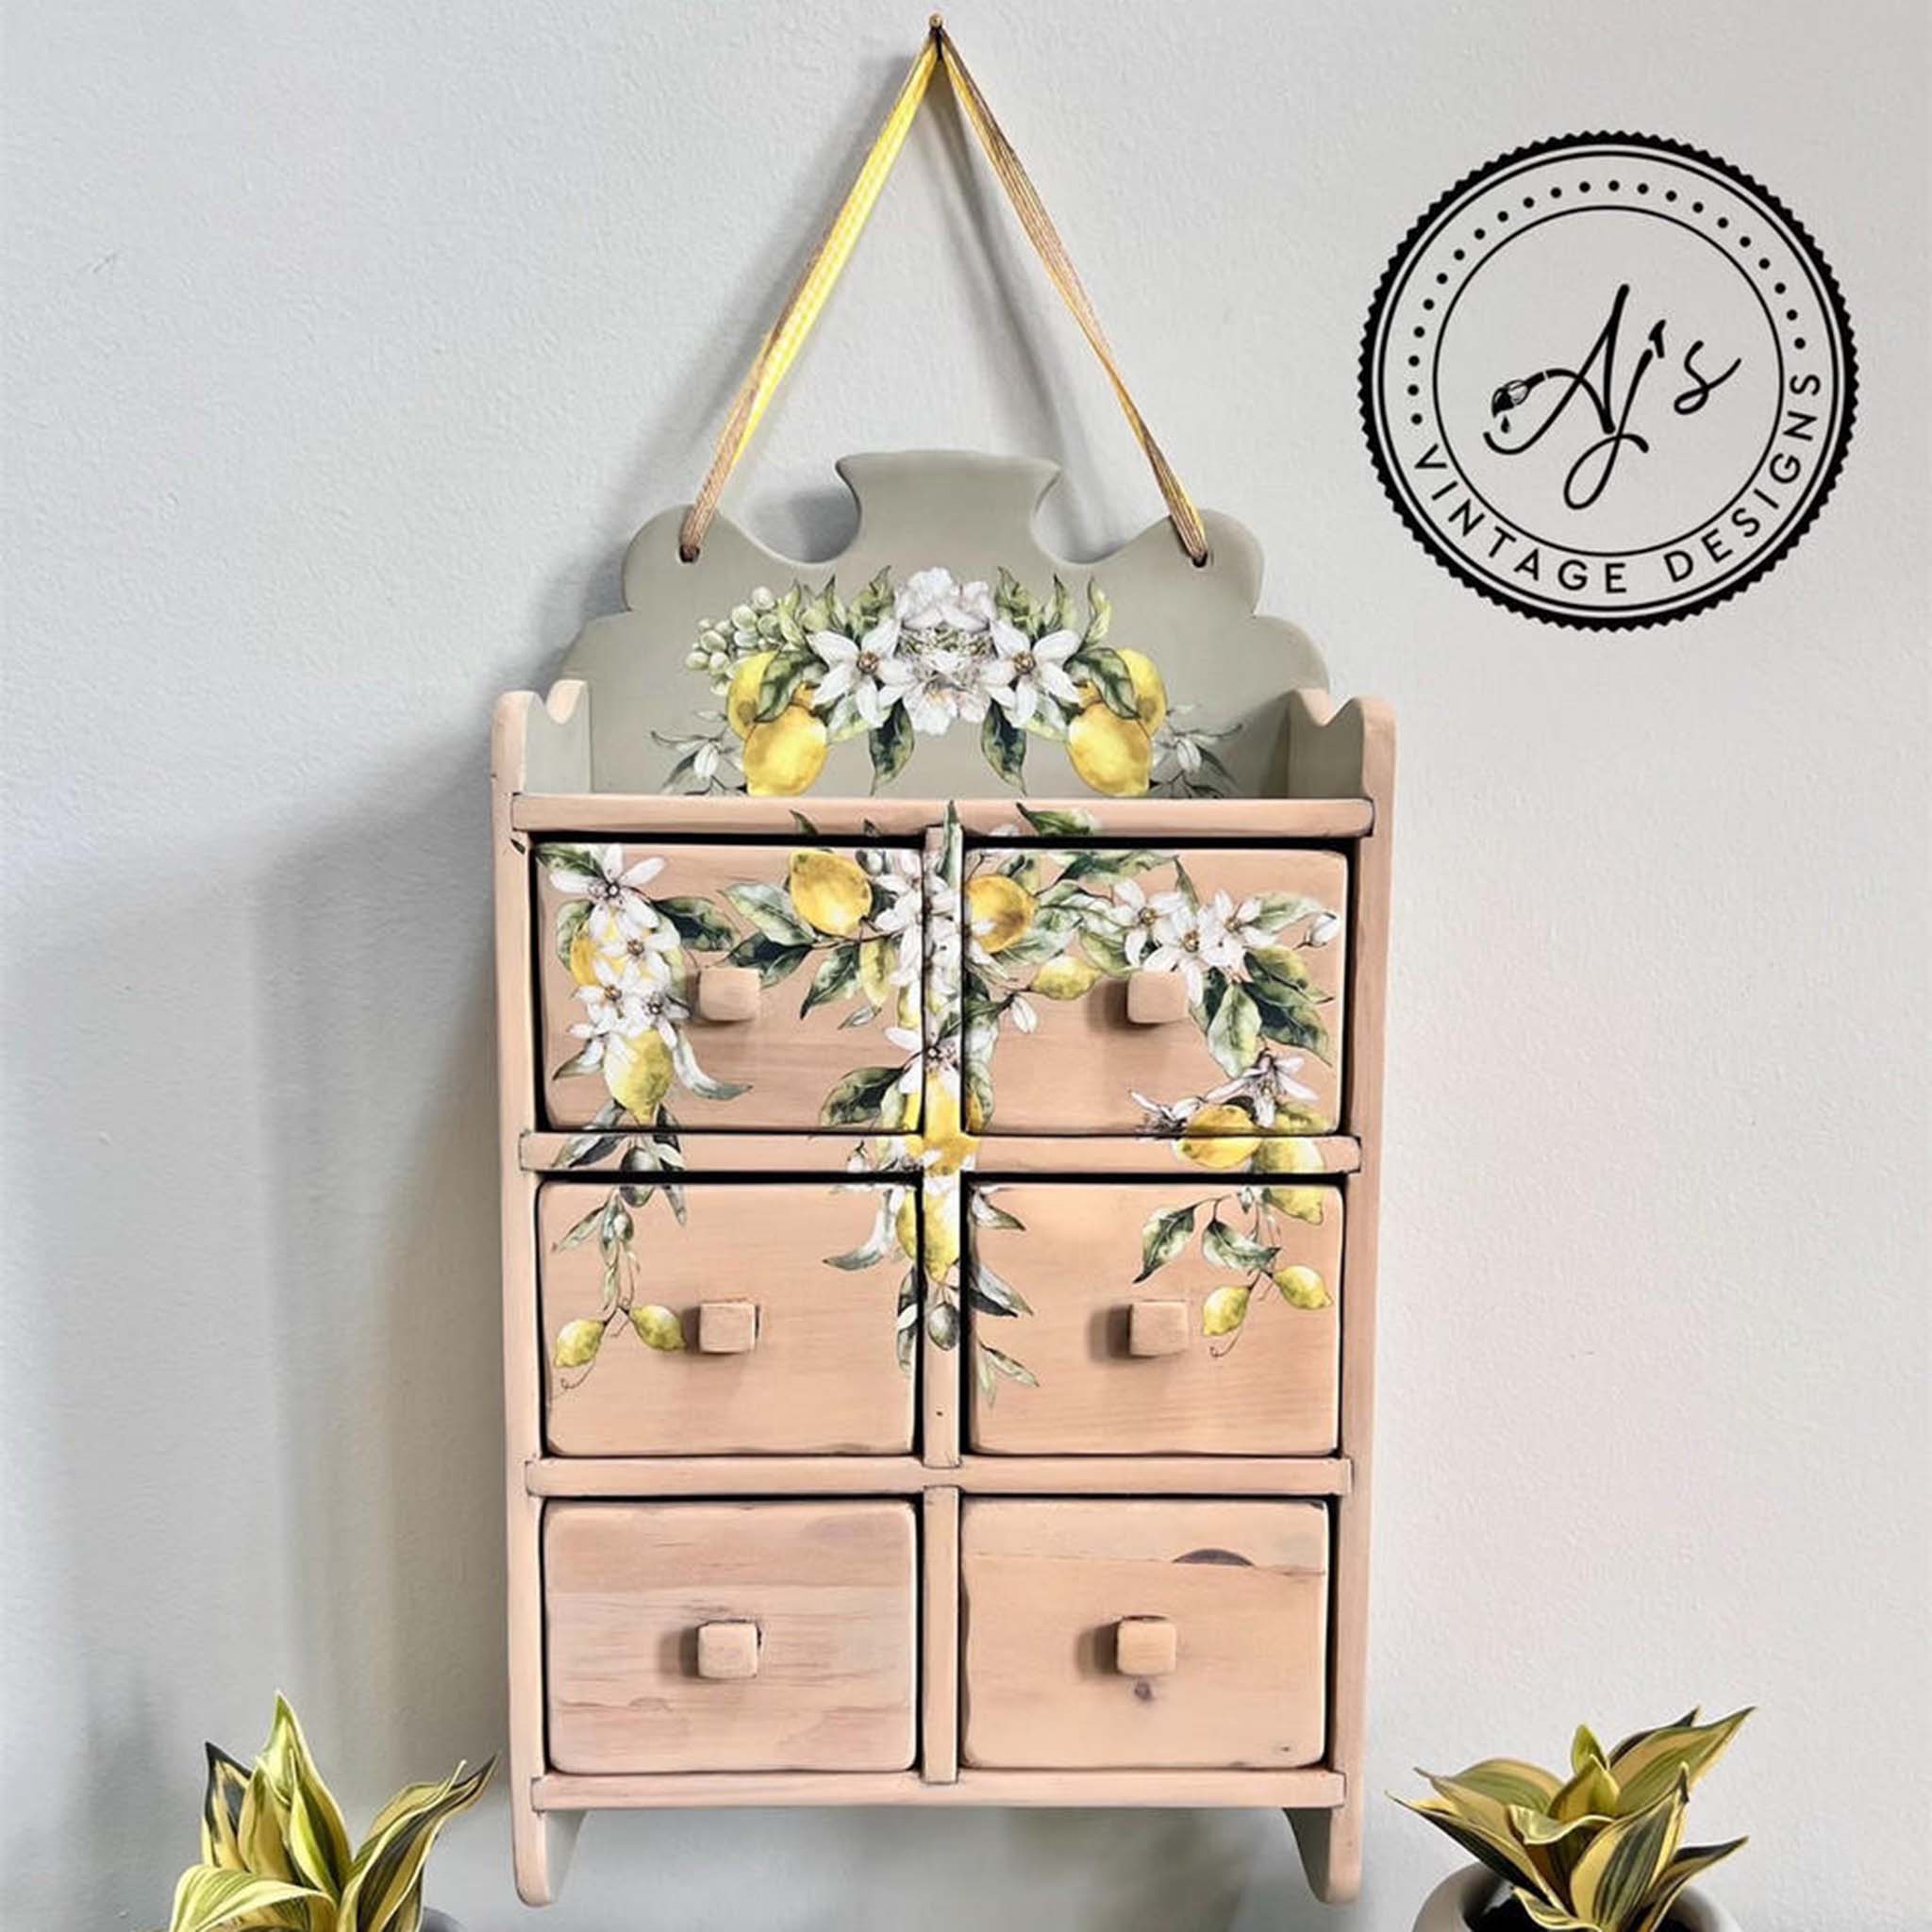 A small hanging card catalog shelf refurbished by Aj's Vintage Designs is painted light coral pink and features Belles & Whistles' Lemon Zest small transfer on it.